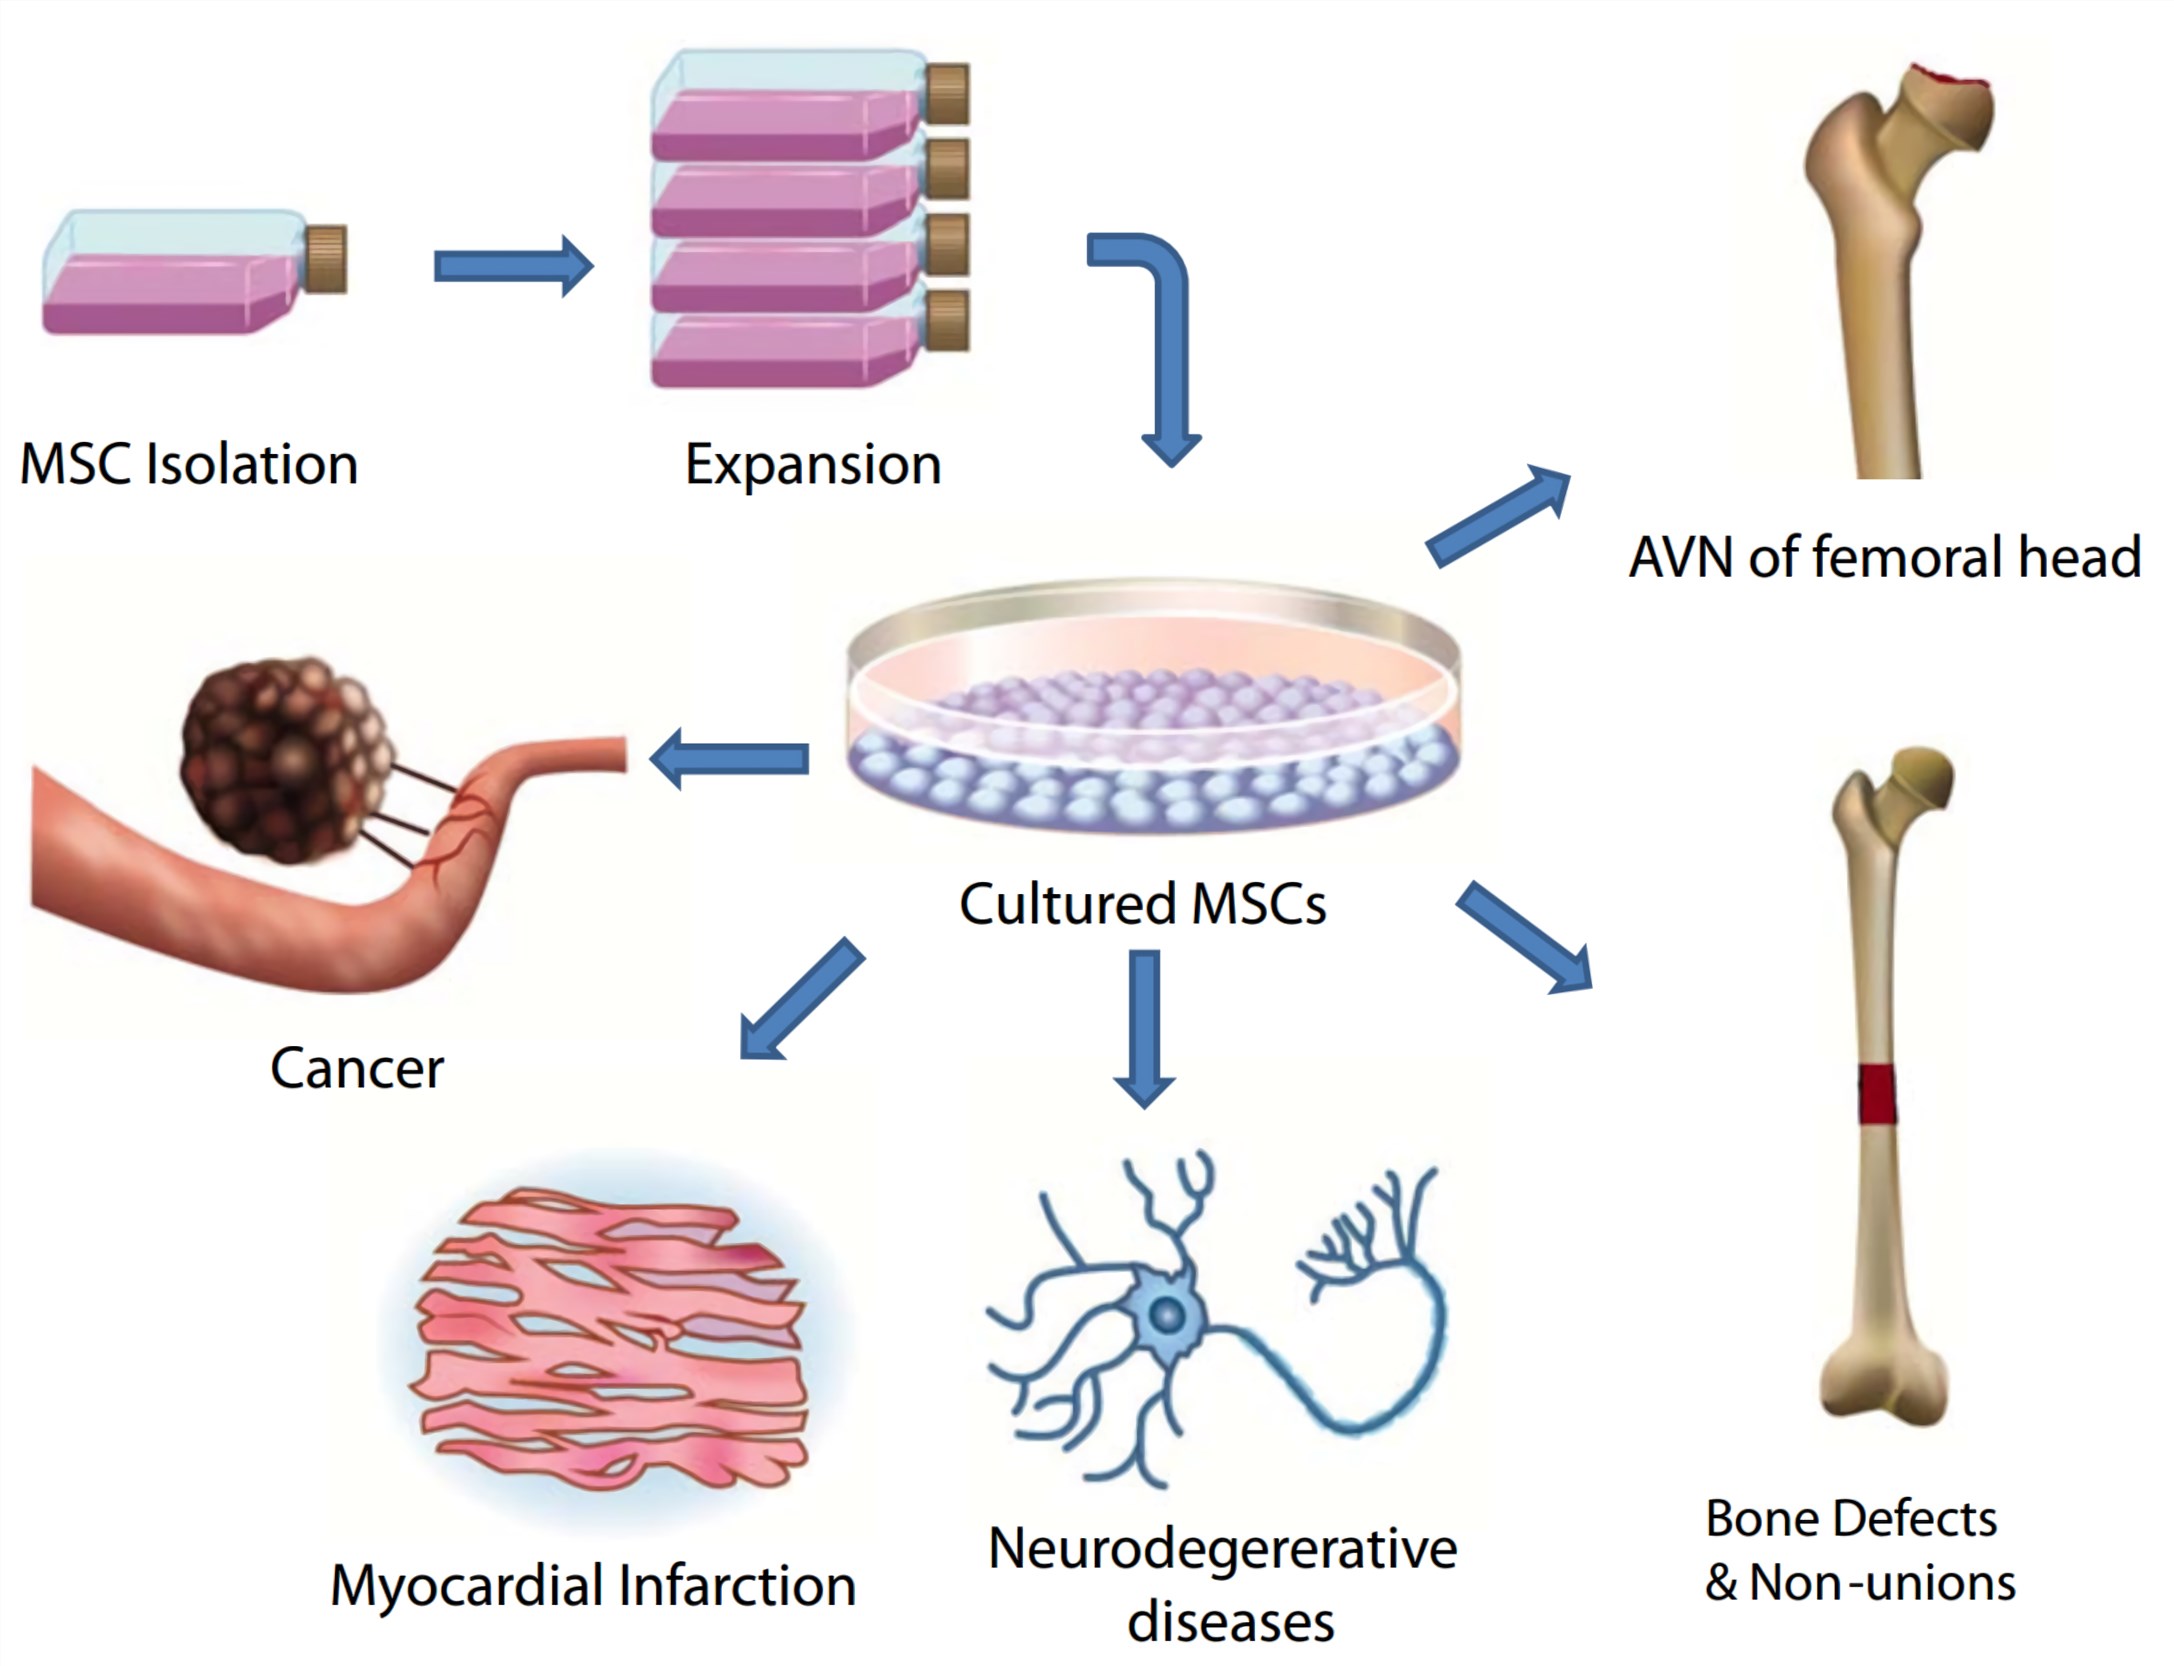 Clinical applications of MSCs.